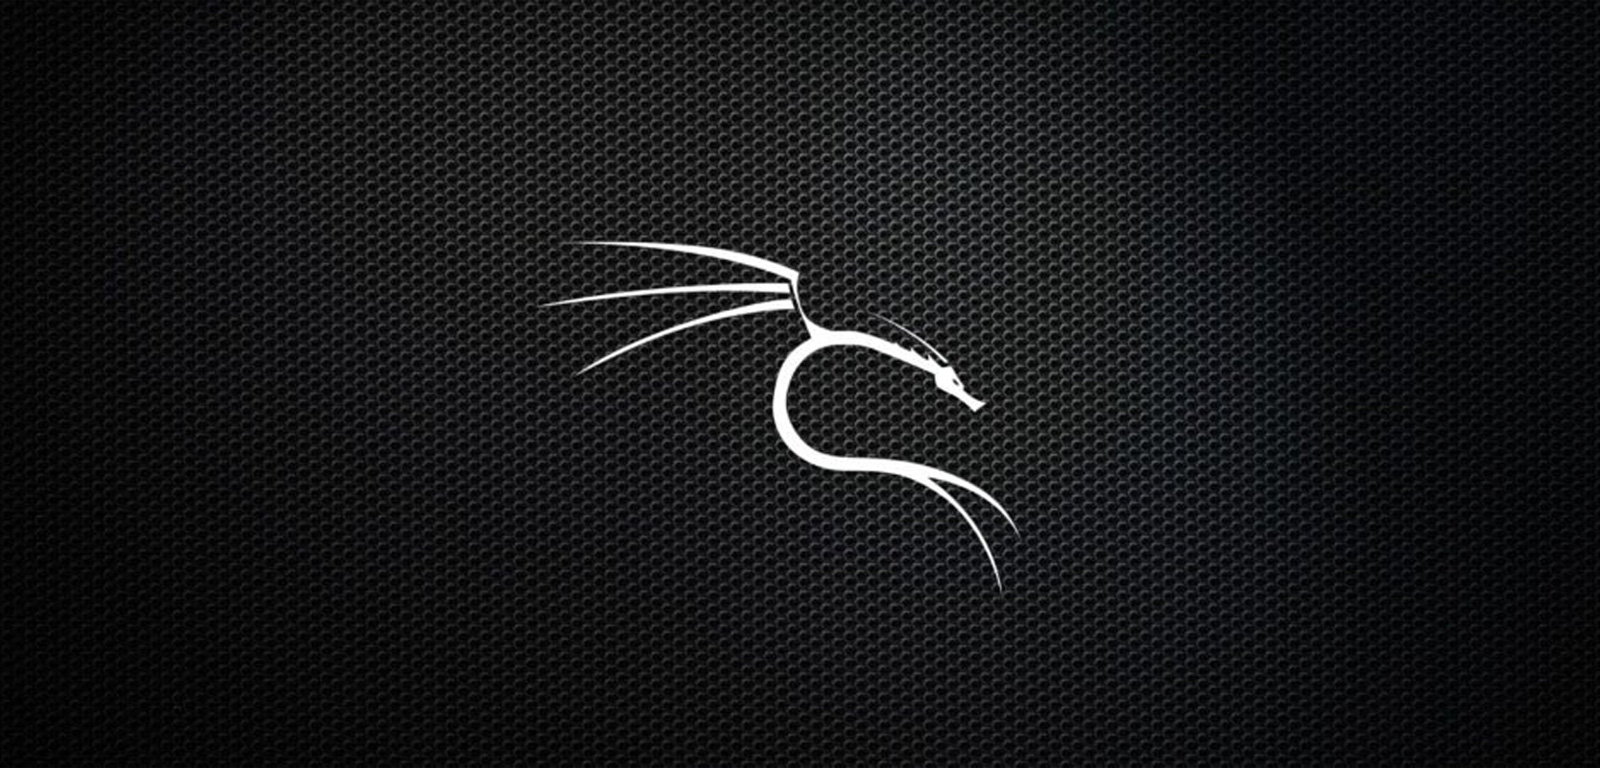 Kali Linux 4 Switches The Default Shell From Bash To Zsh